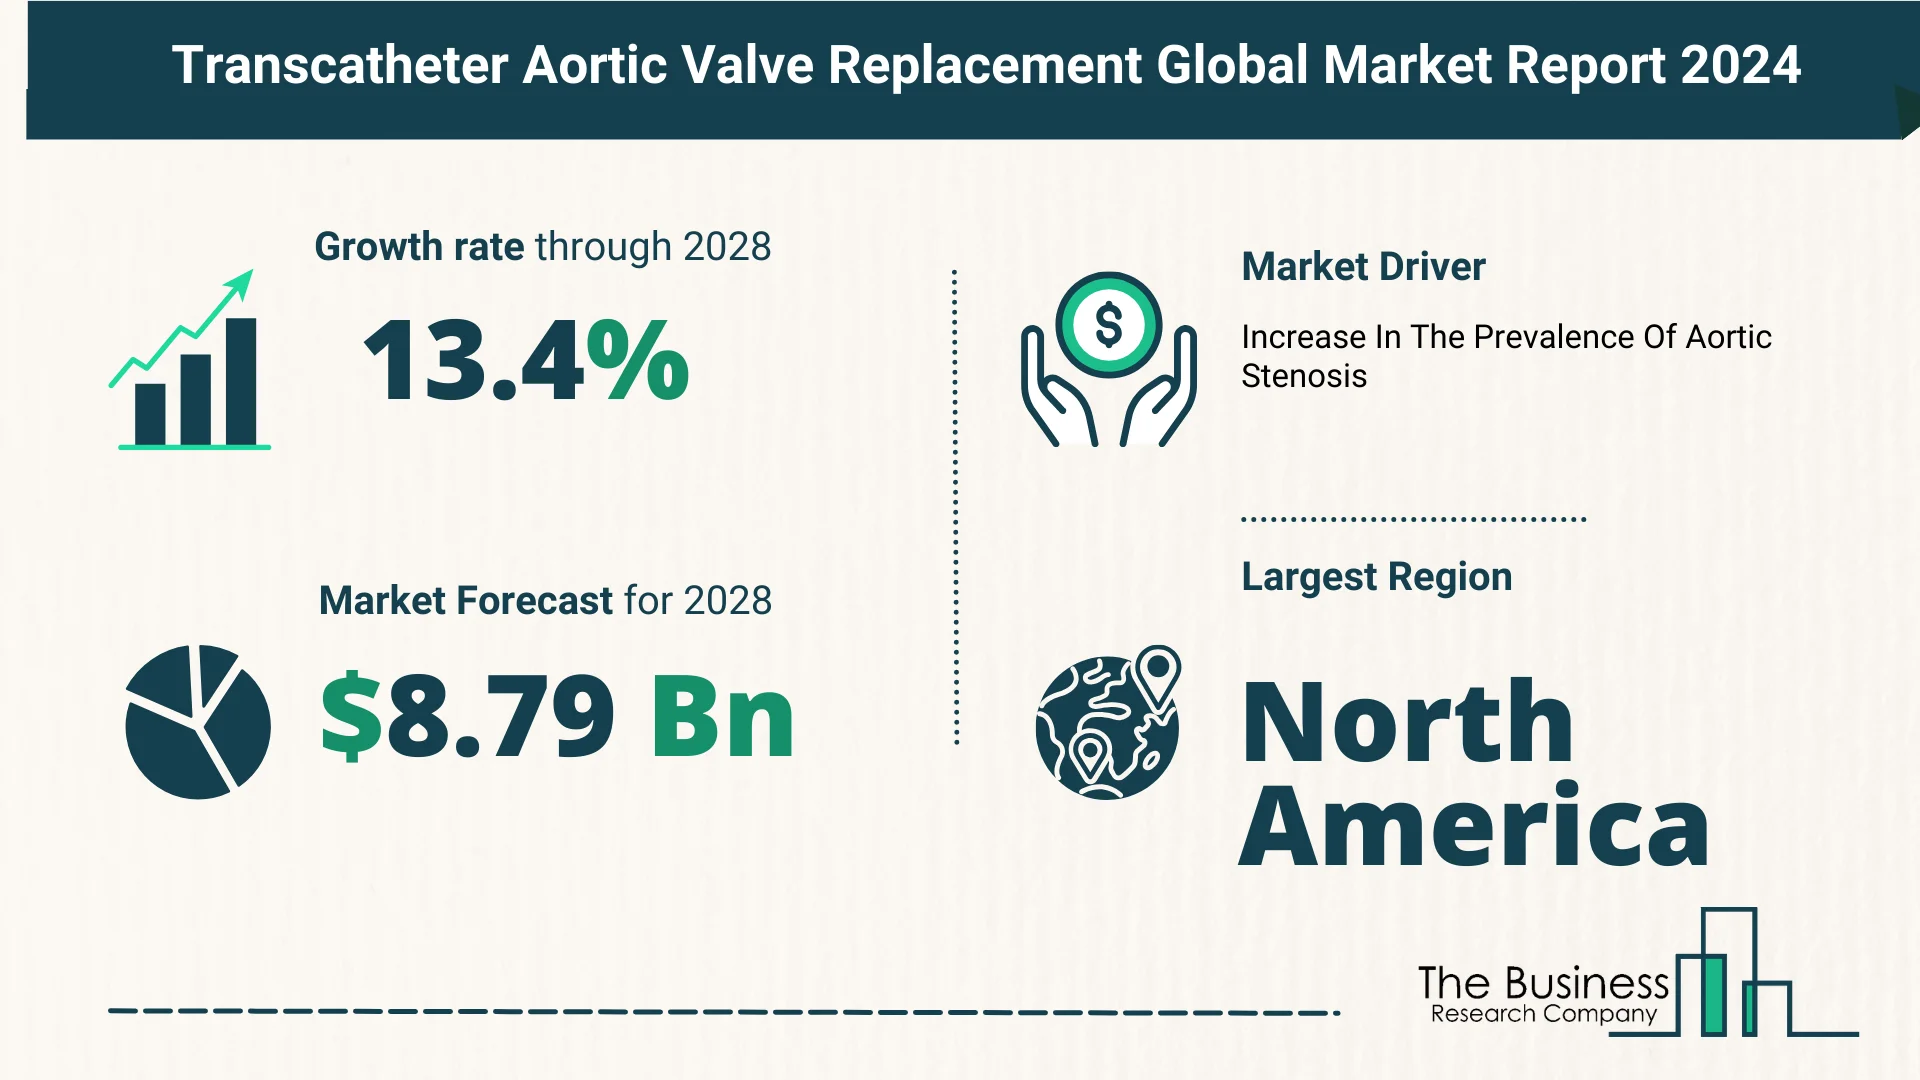 5 Key Insights On The Transcatheter Aortic Valve Replacement Market 2024